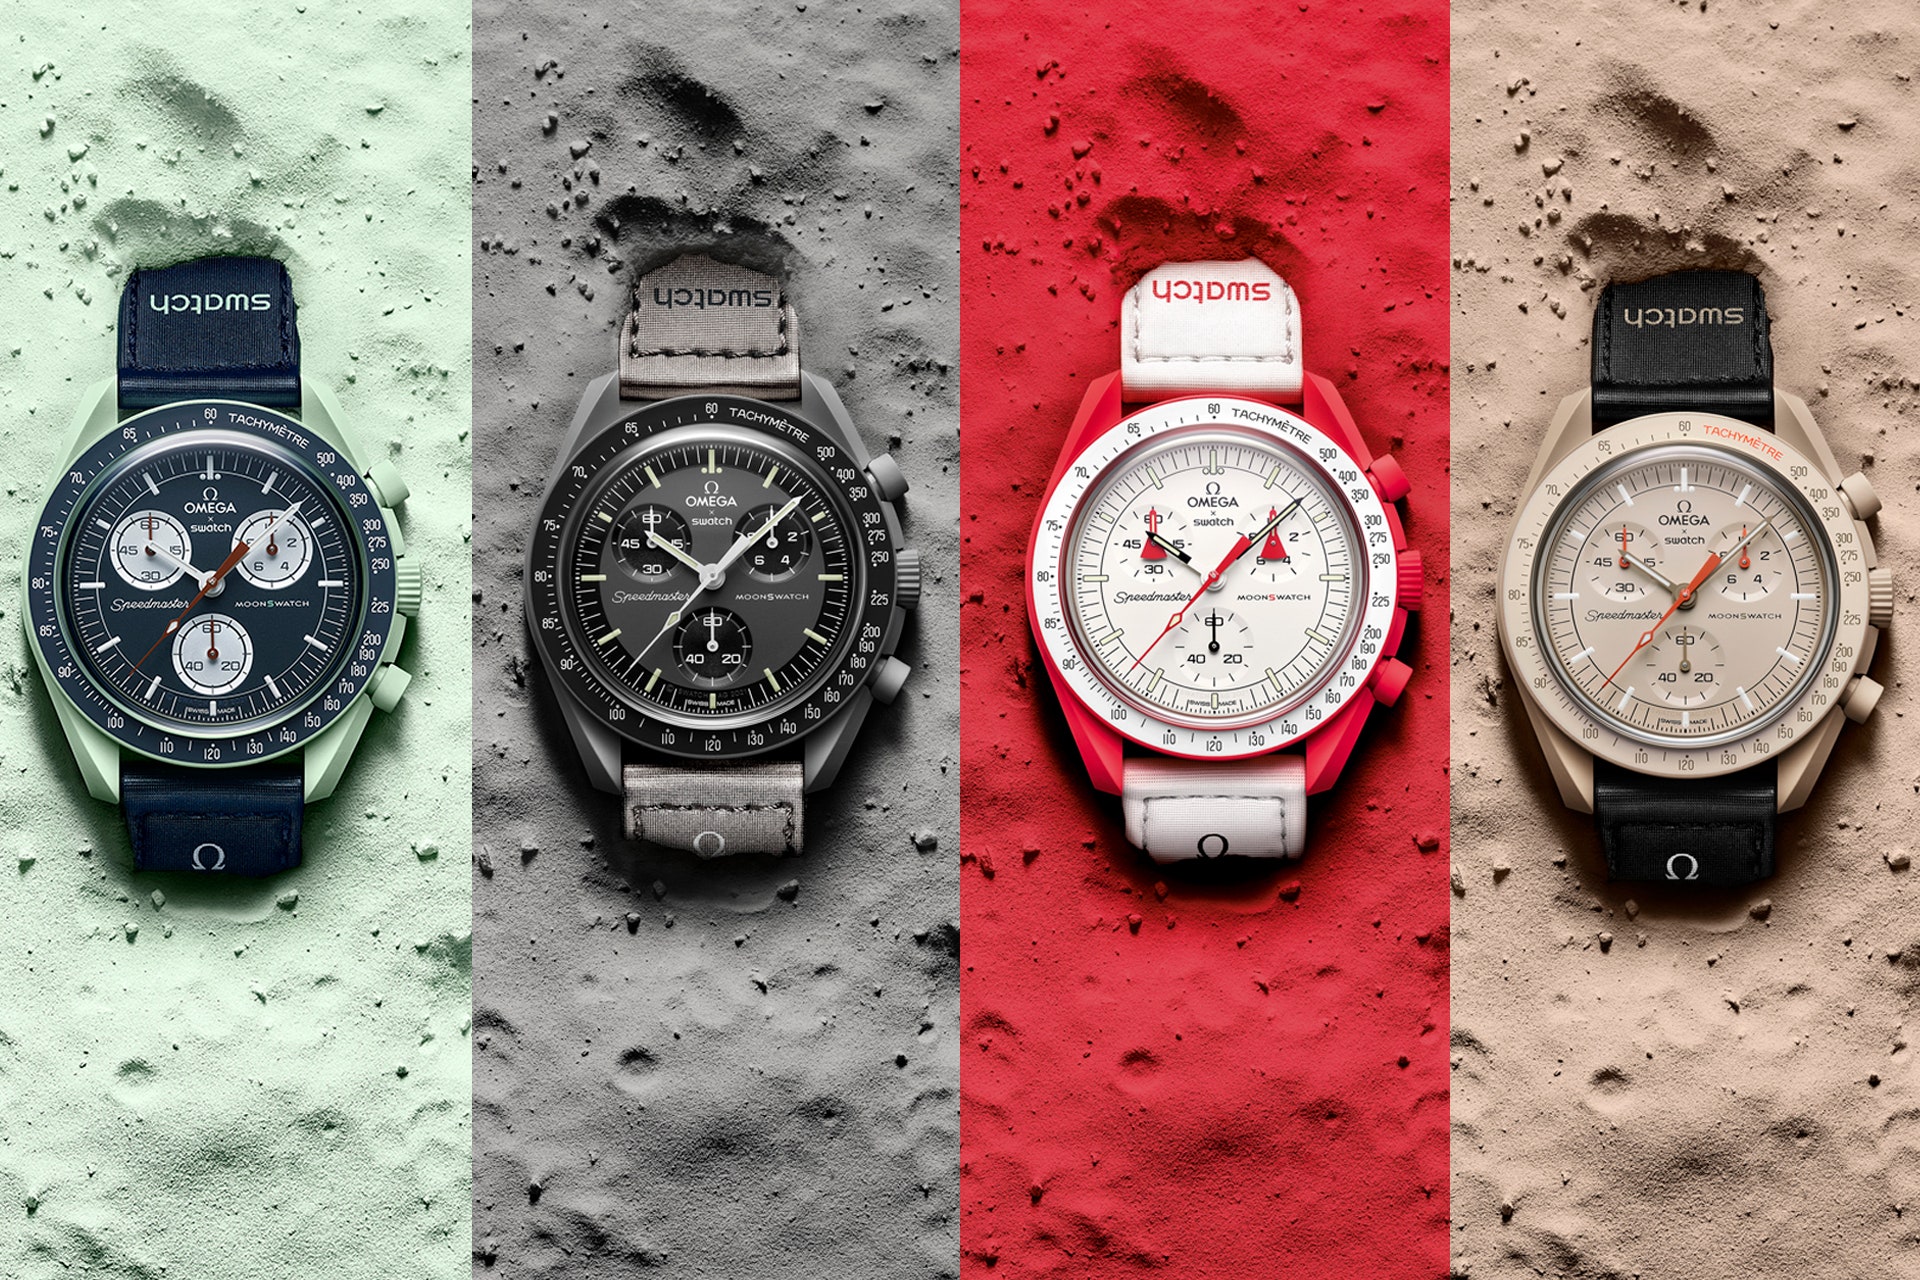 Swatch omega moonwatch